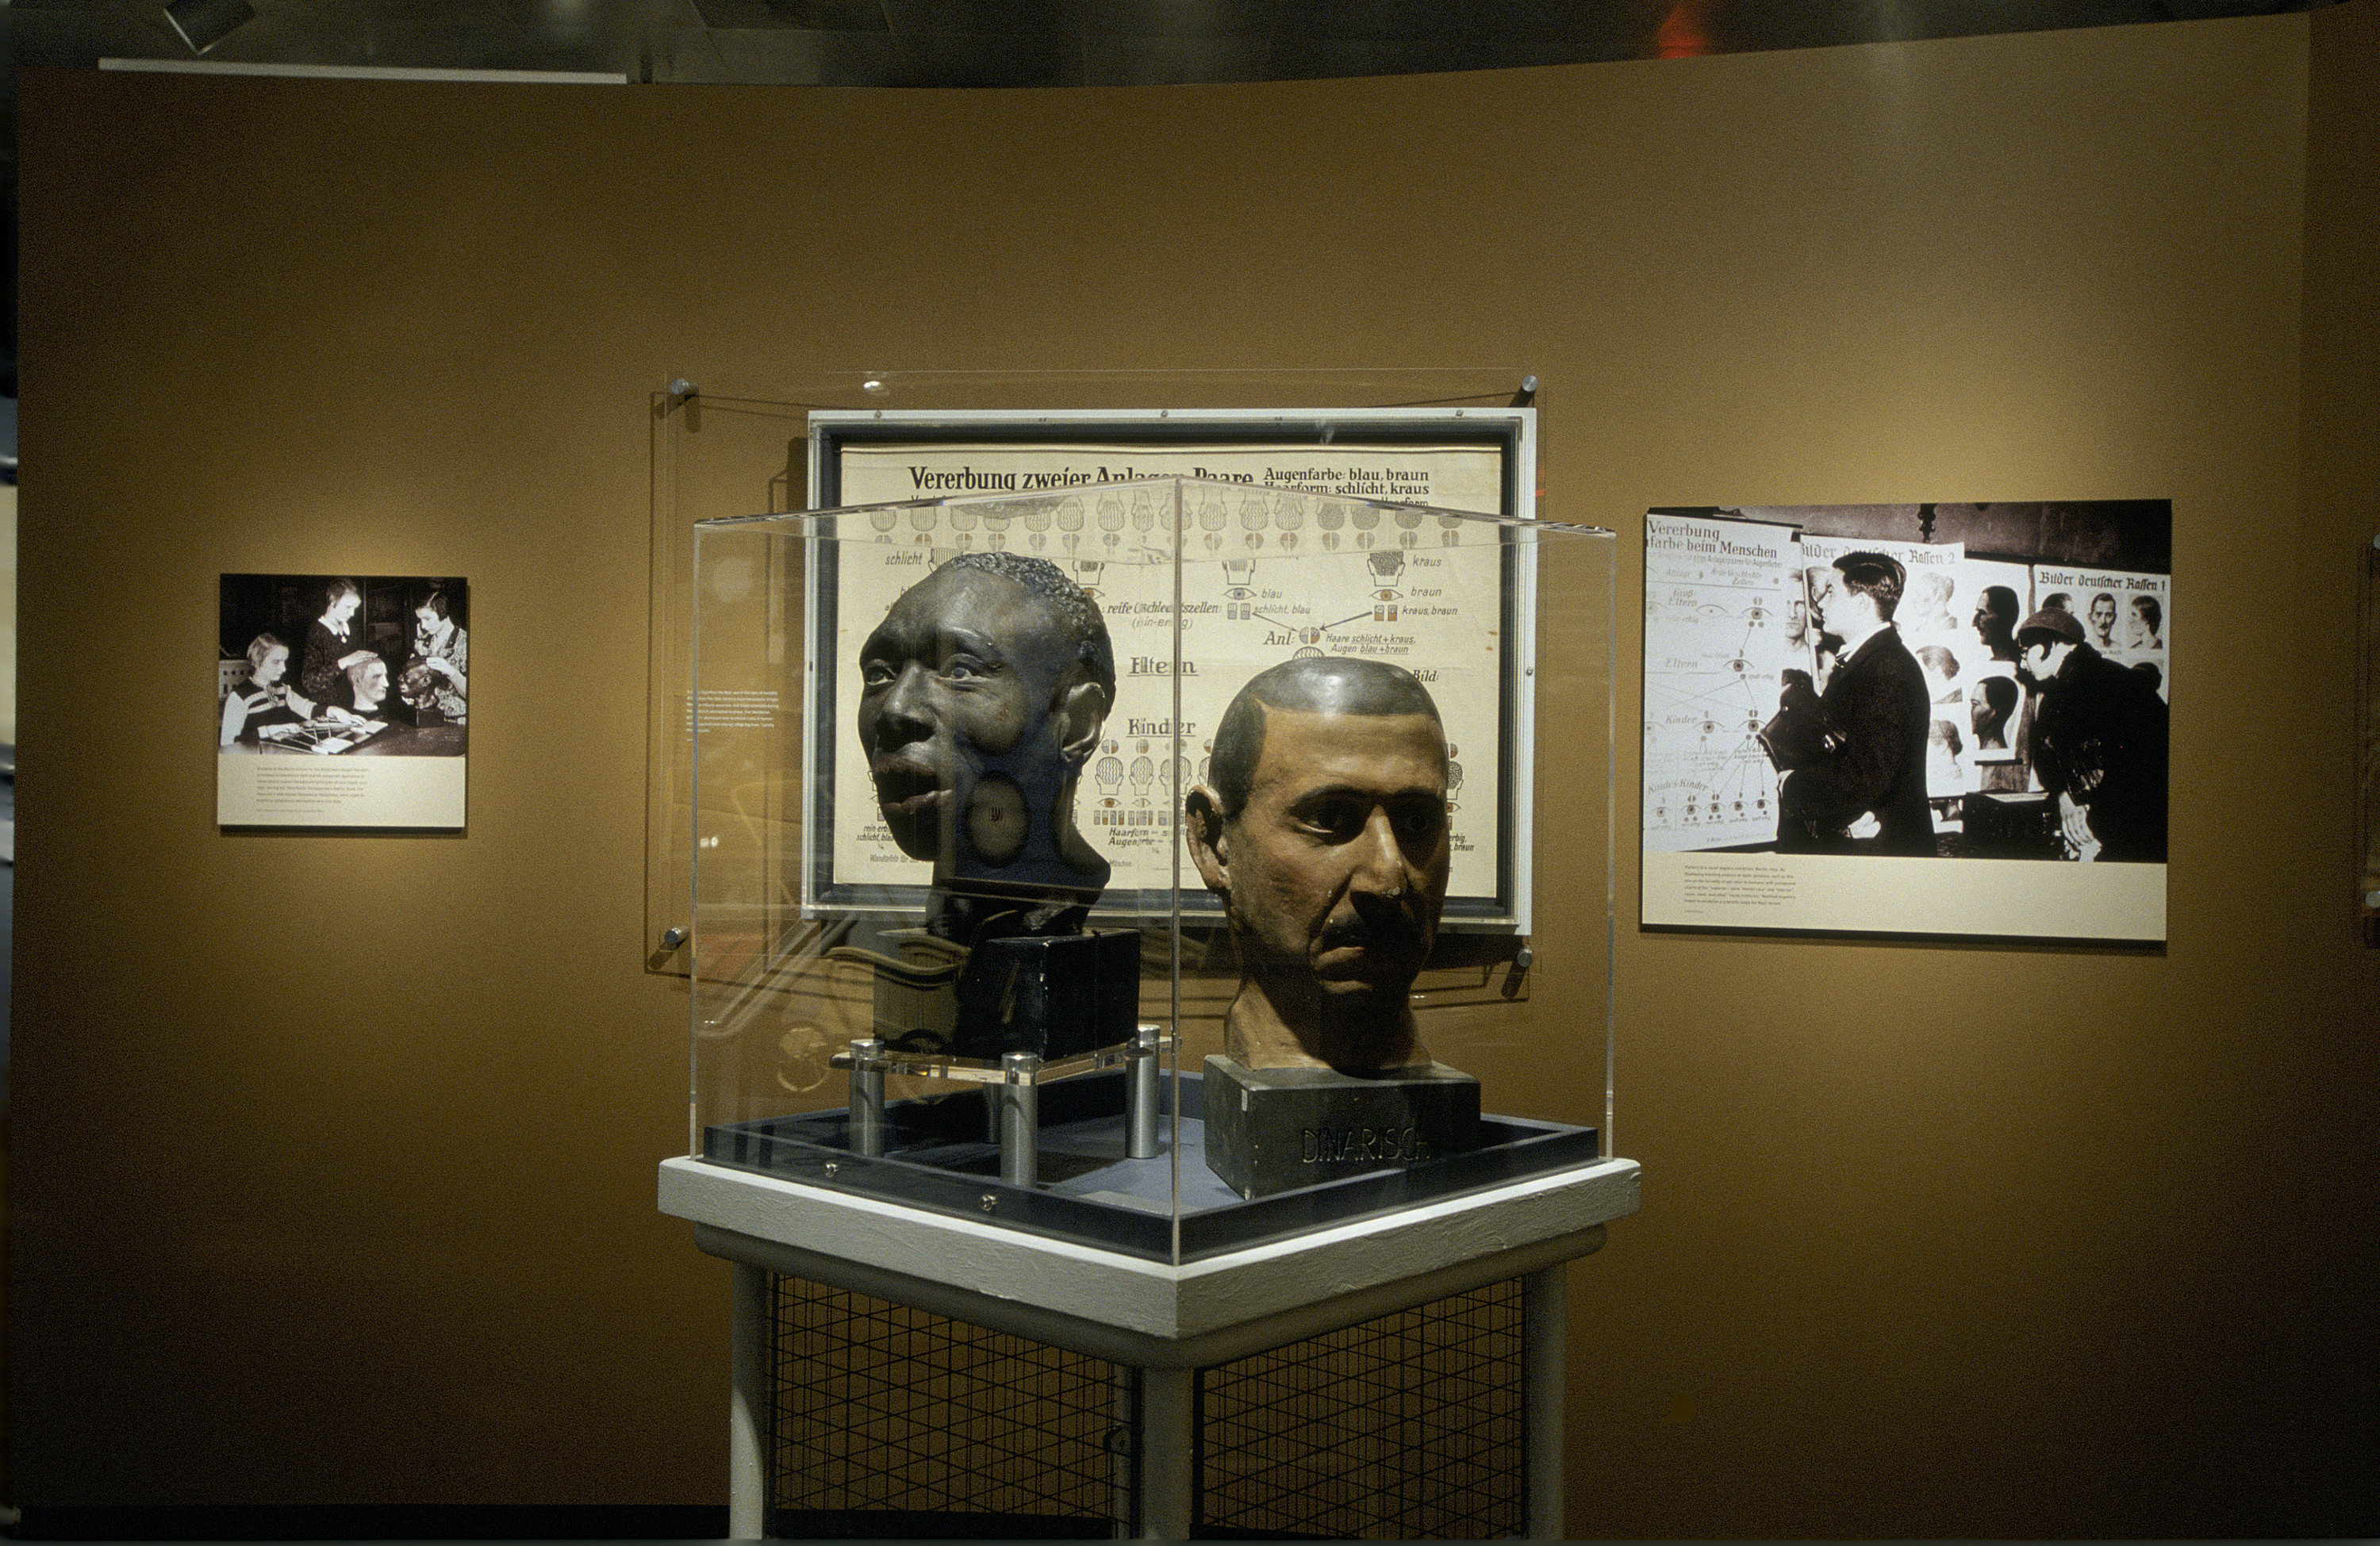 One segment from the special exhibition, "Deadly Medicine: Creating the Master Race," U.S. Holocaust Memorial Museum, which opened on April 22, 2004.